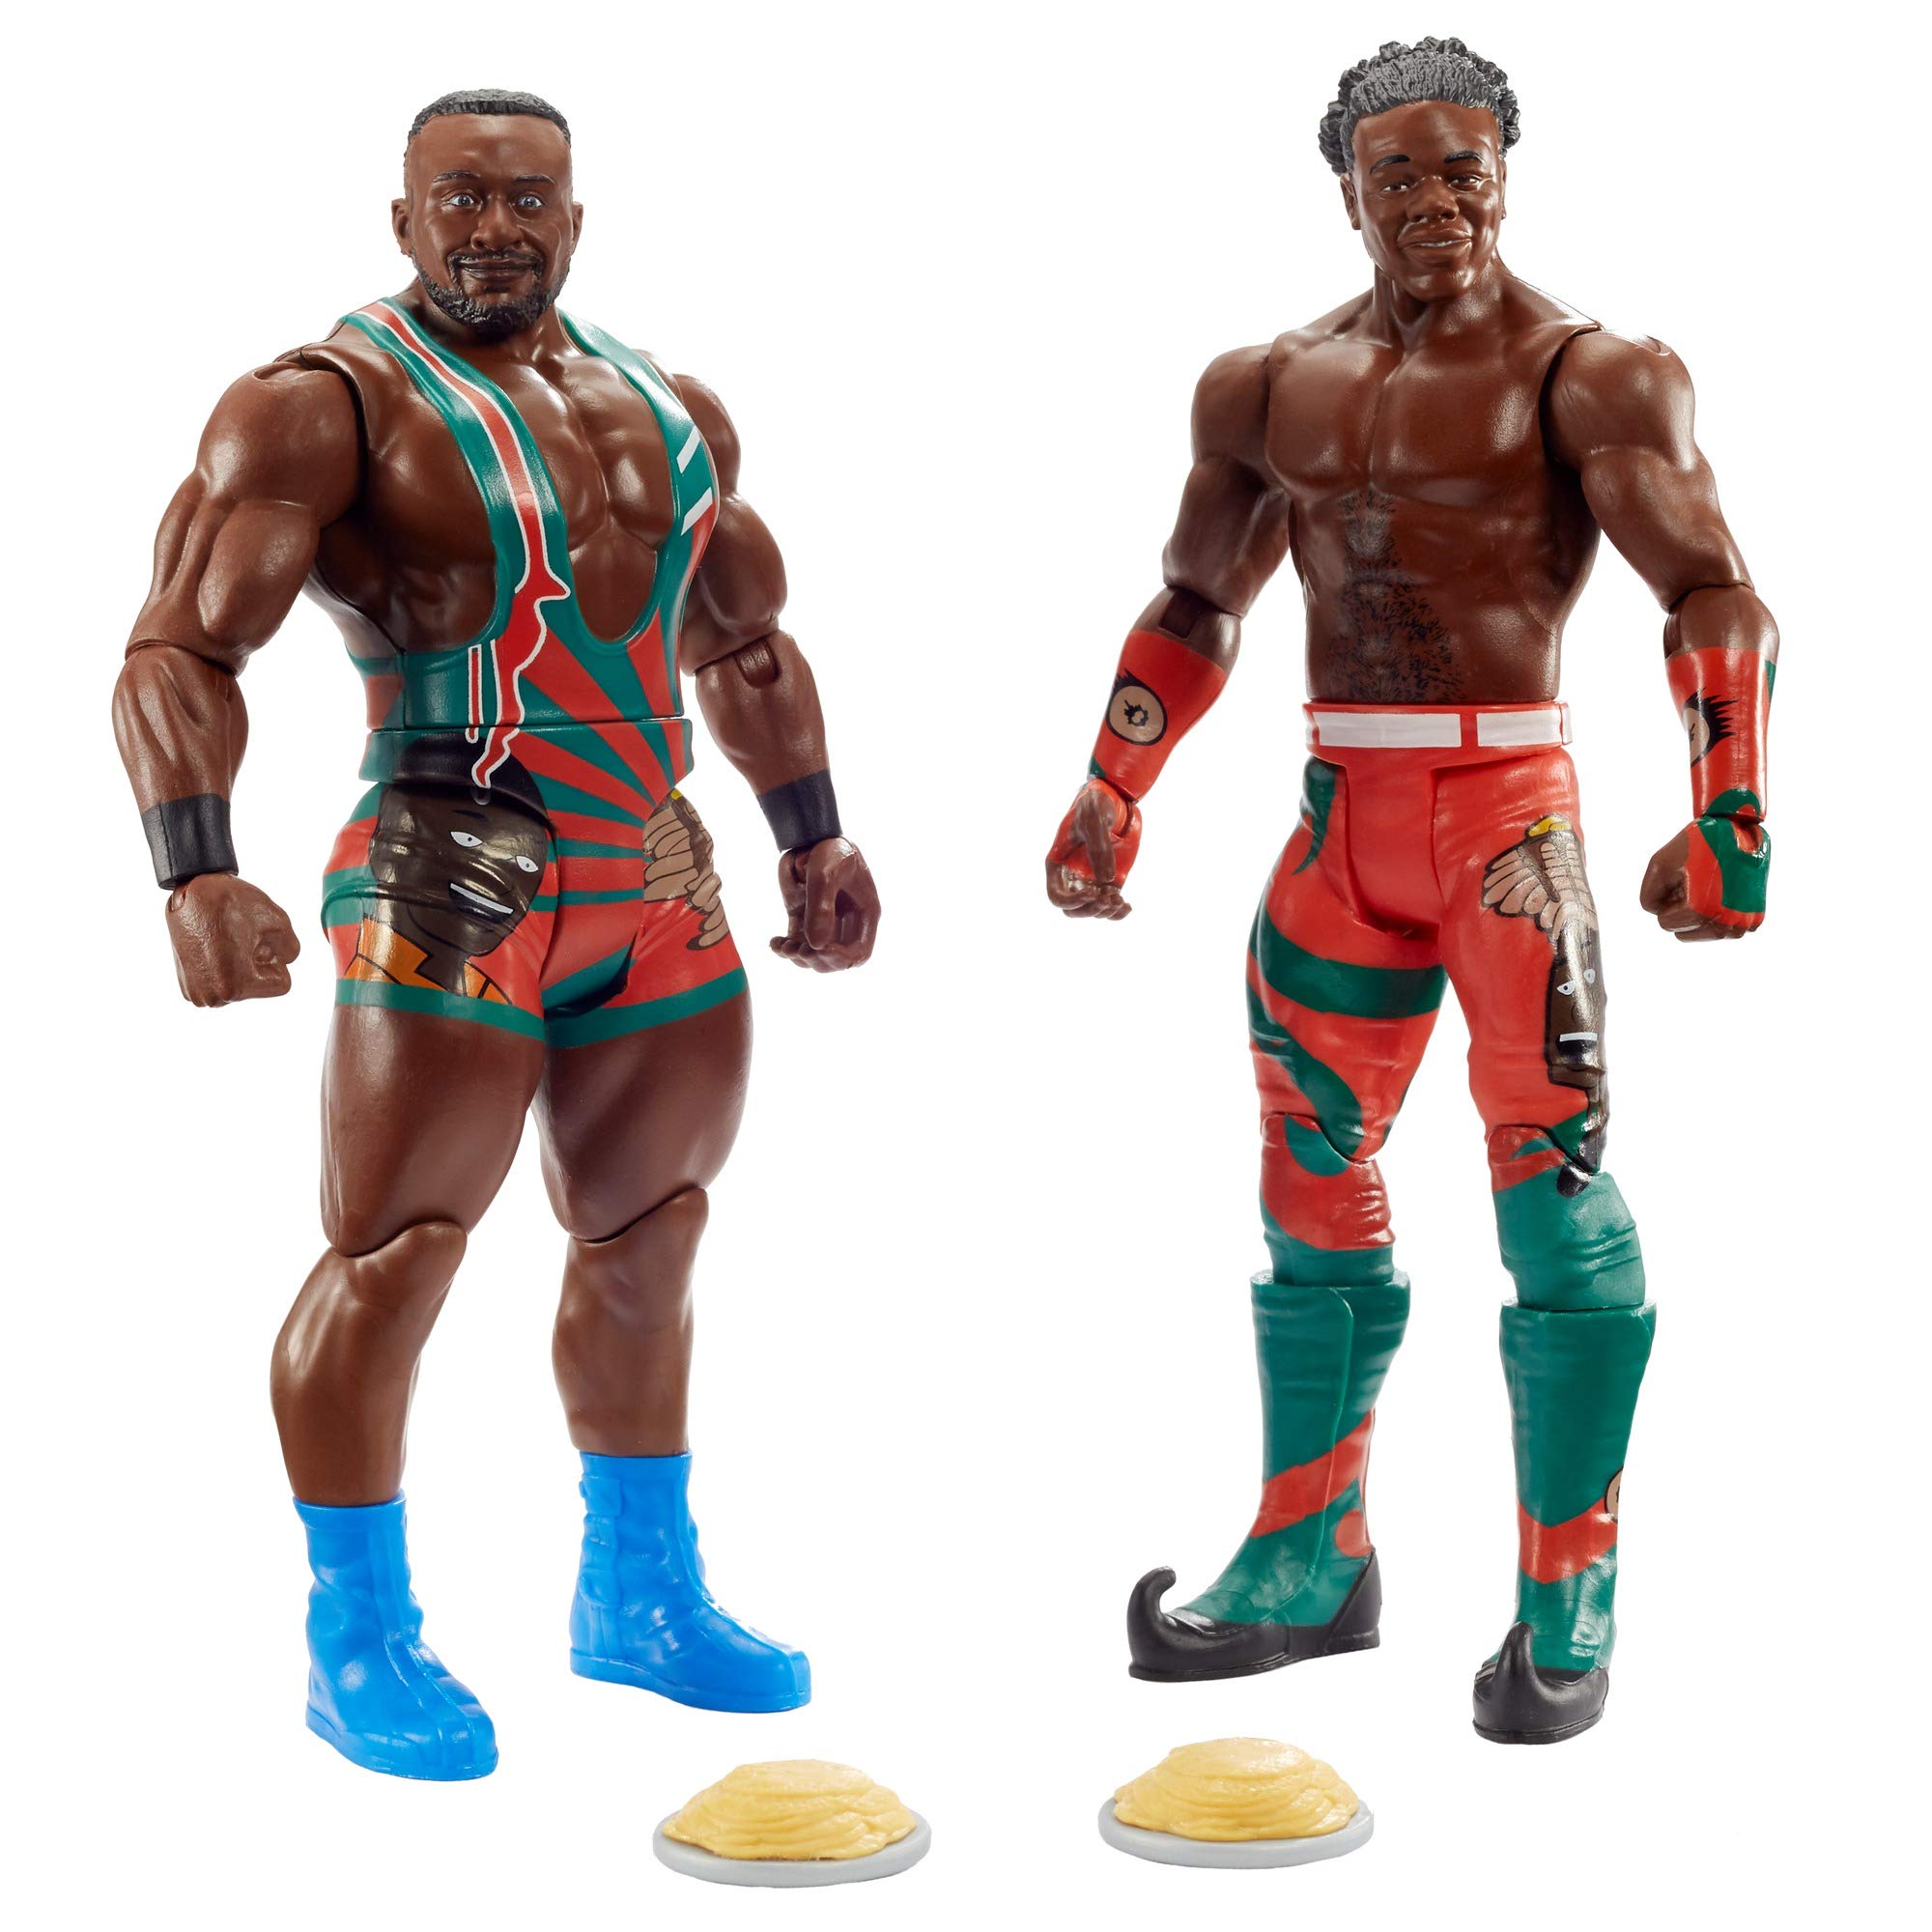 WWE New Day: Big E vs Xavier Woods Battle Pack Series #63 with Two 6-inch Articulated Action Figures & Ring Gear